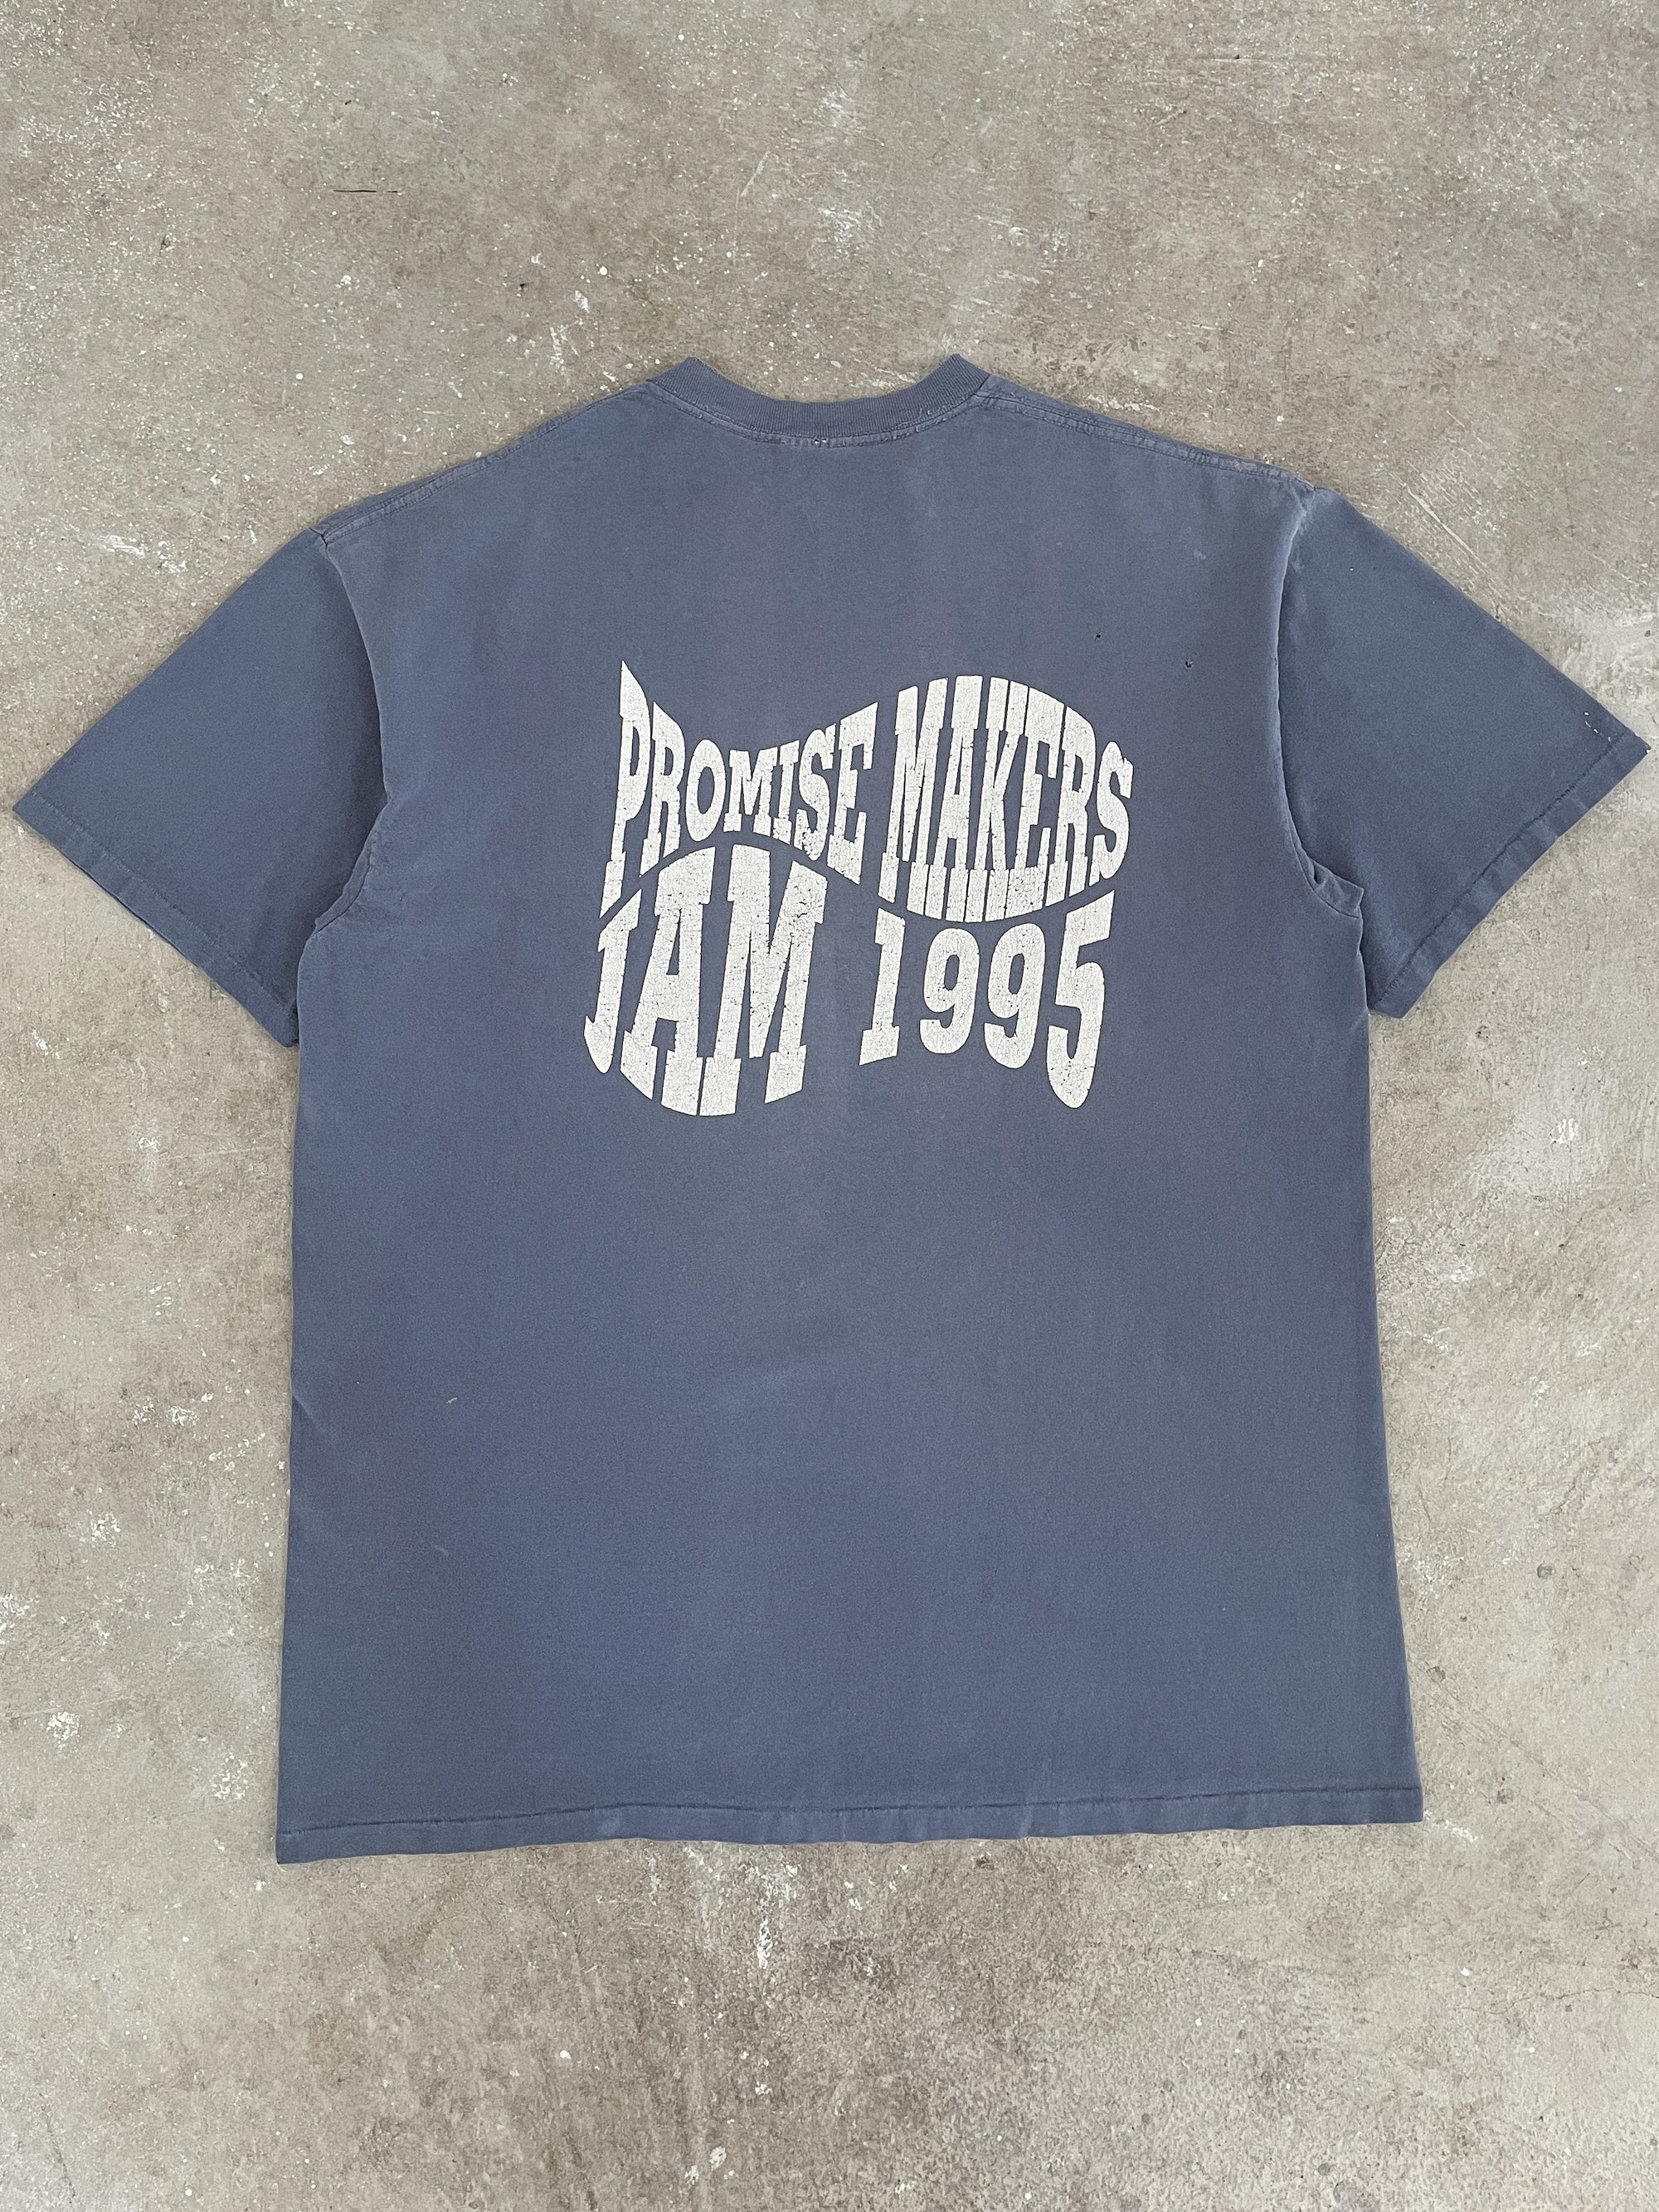 1990s “Promise Makers Jam” Painted Distressed Single Stitched Tee (XL)